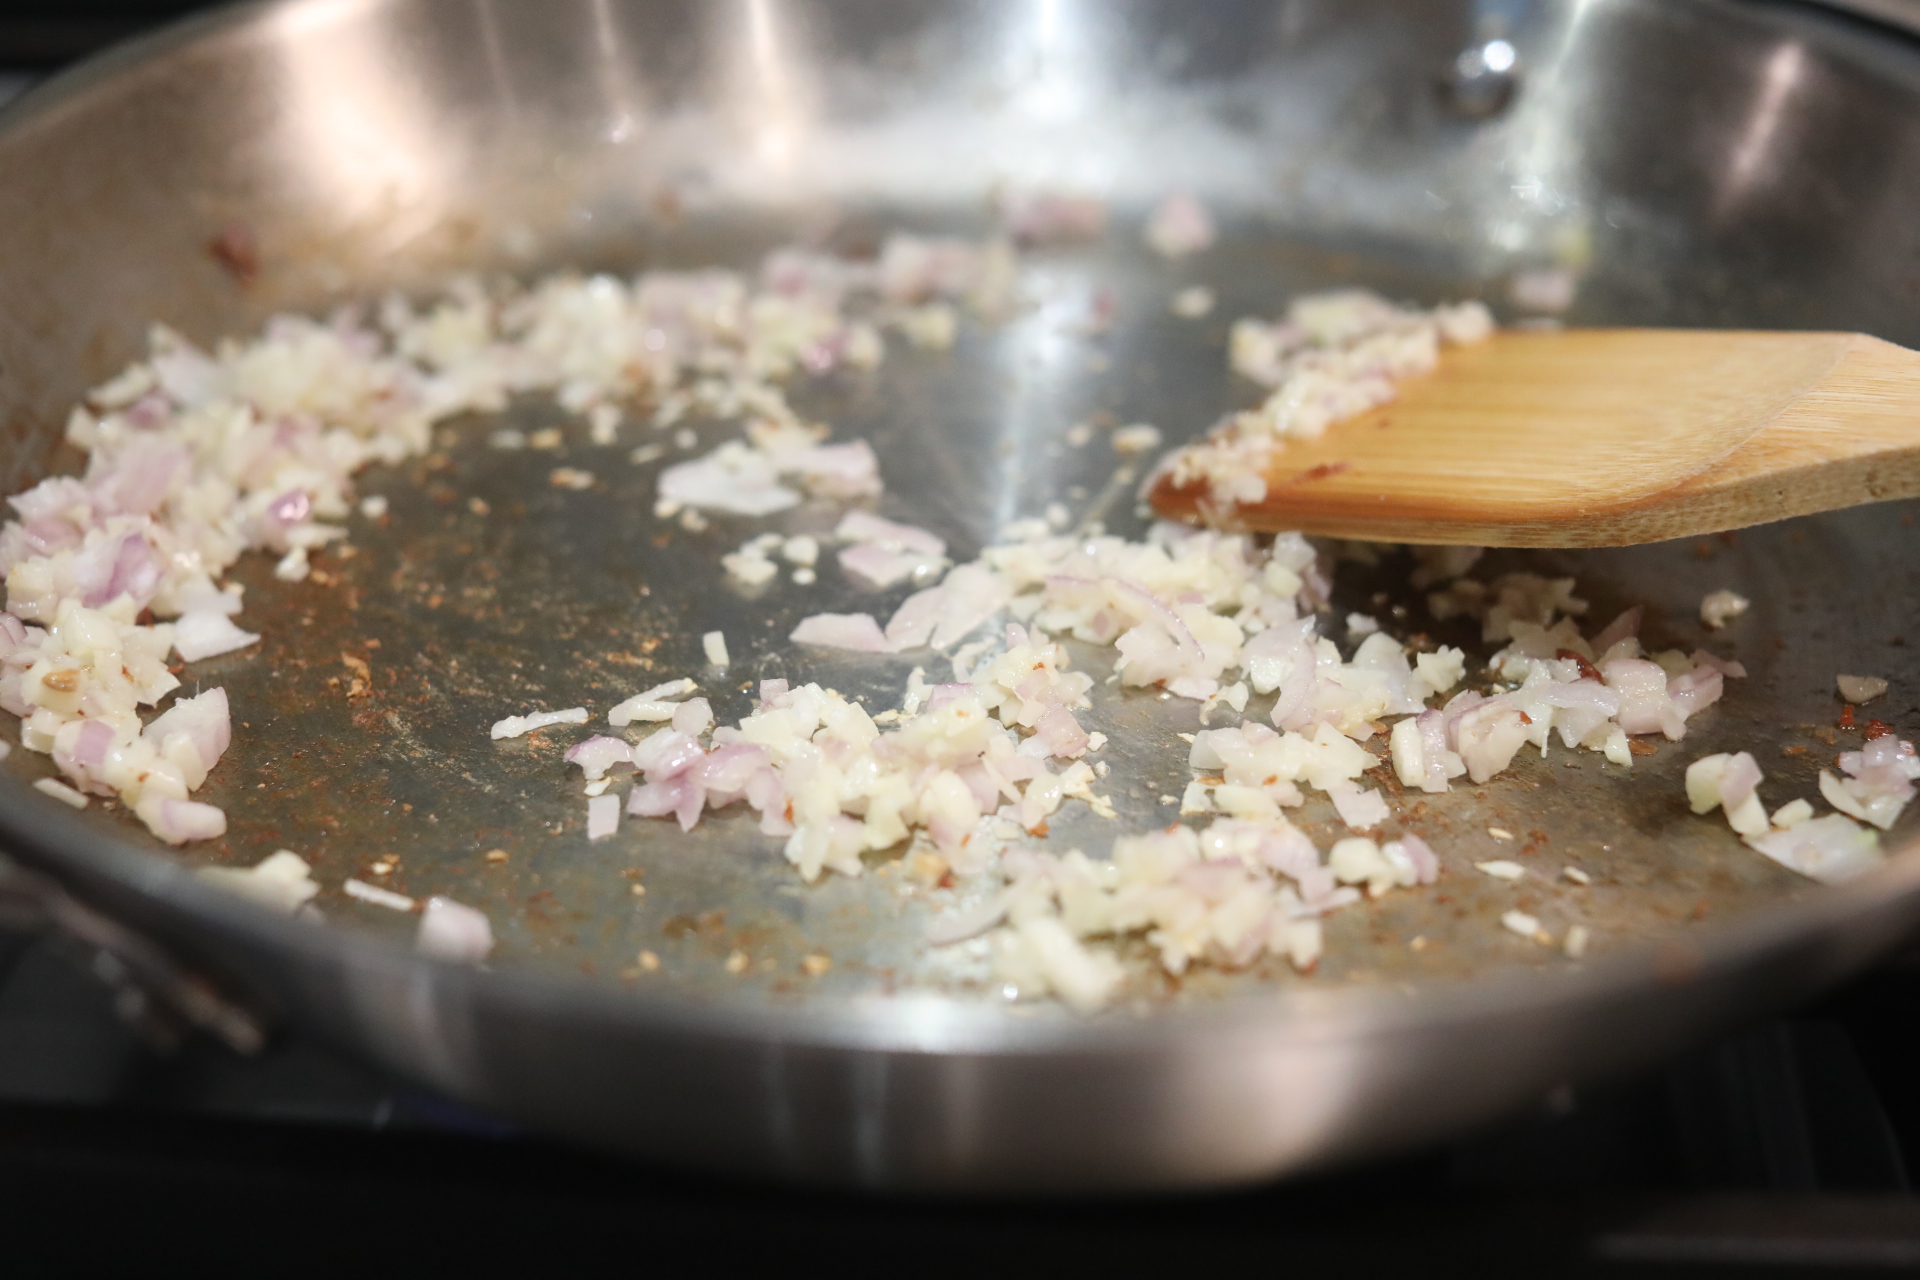 Shallot and garlic sautéing in metal pan with wooden spoon.